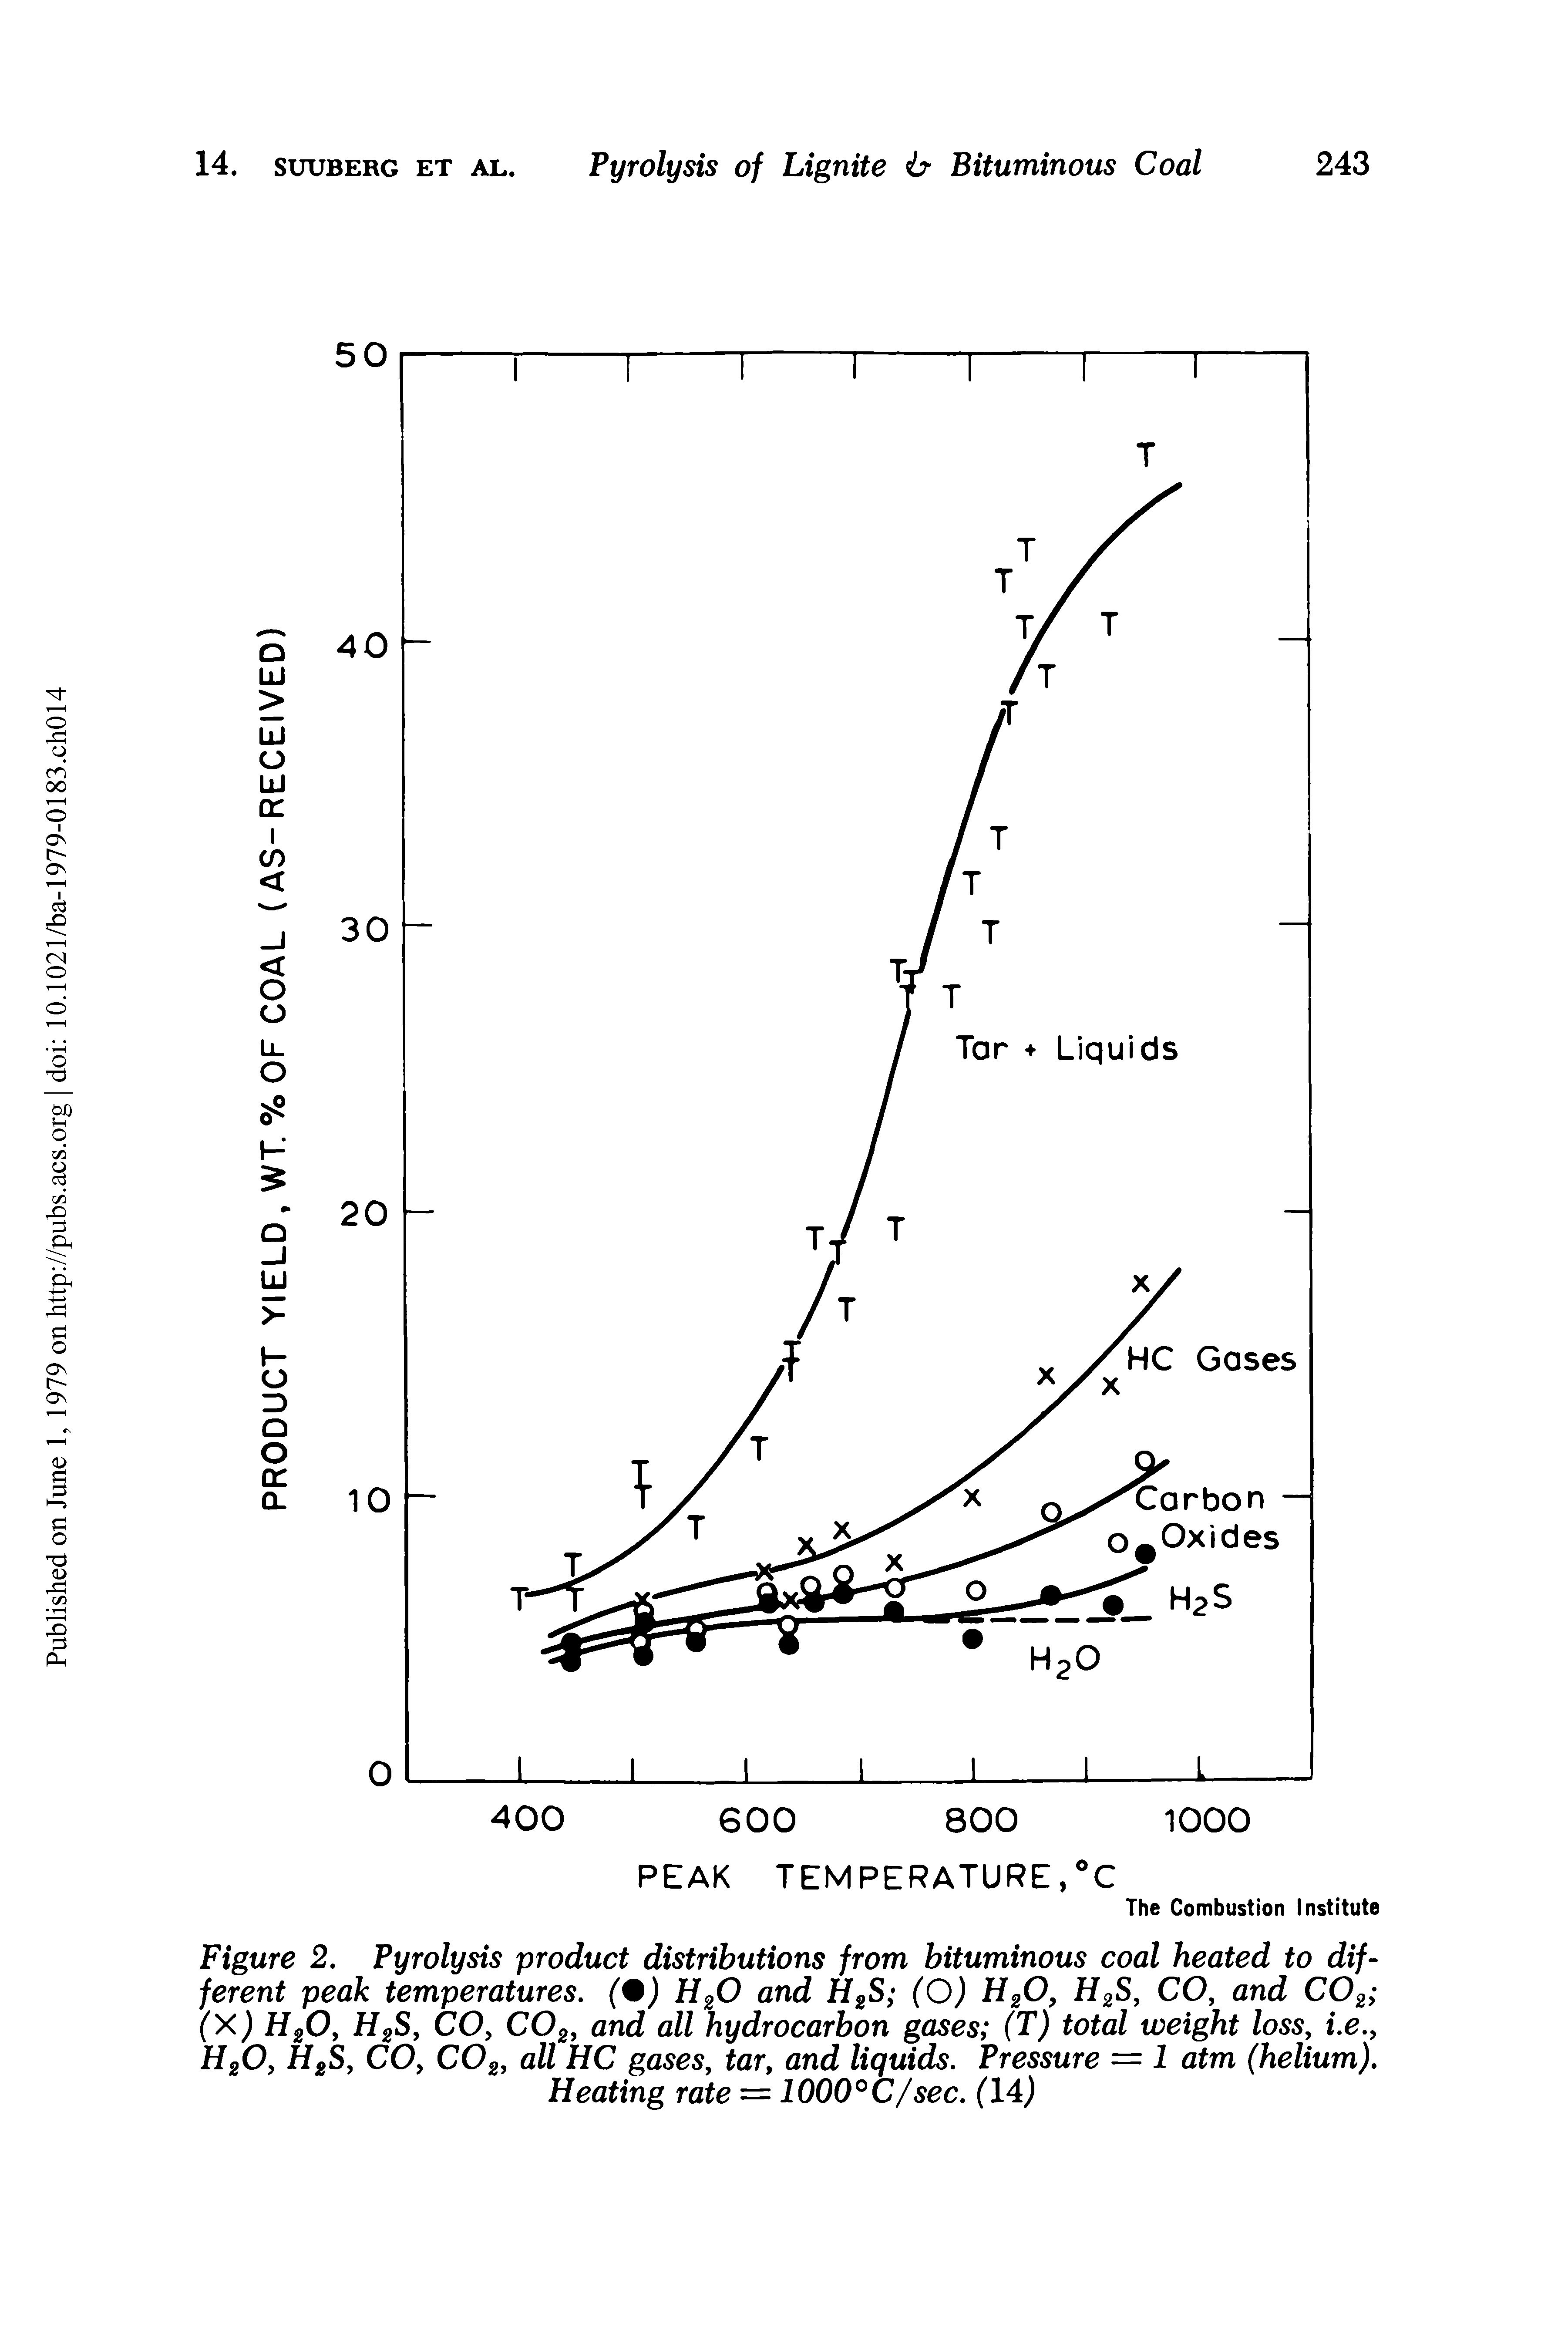 Figure 2. Pyrolysis product distributions from bituminous coal heated to different peak temperatures. (%) H20 and H2S (O) H20, H2S, CO, and C02 (X) H20, H2S, CO, C02, and all hydrocarbon gases (T) total weight loss, i.e., H20, H2S, CO, C02, all HC gases, tar, and liquids. Pressure = 1 atm (helium). Heating rate = 1000°C/sec. (14)...